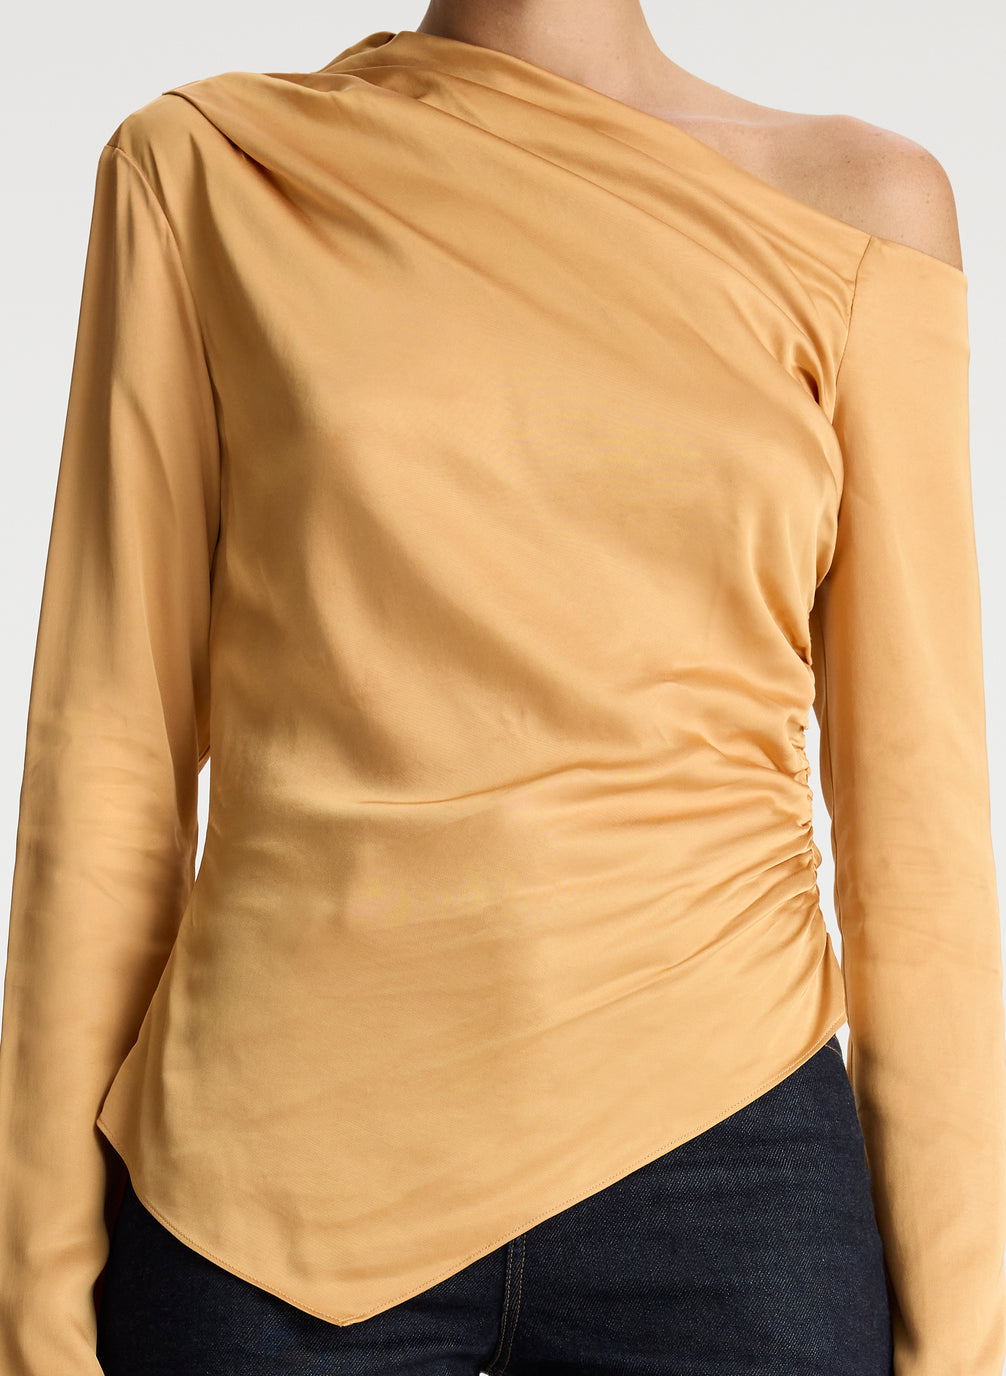 detail view of woman wearing asymmetric gold satin long sleeve top and dark wash denim jeans